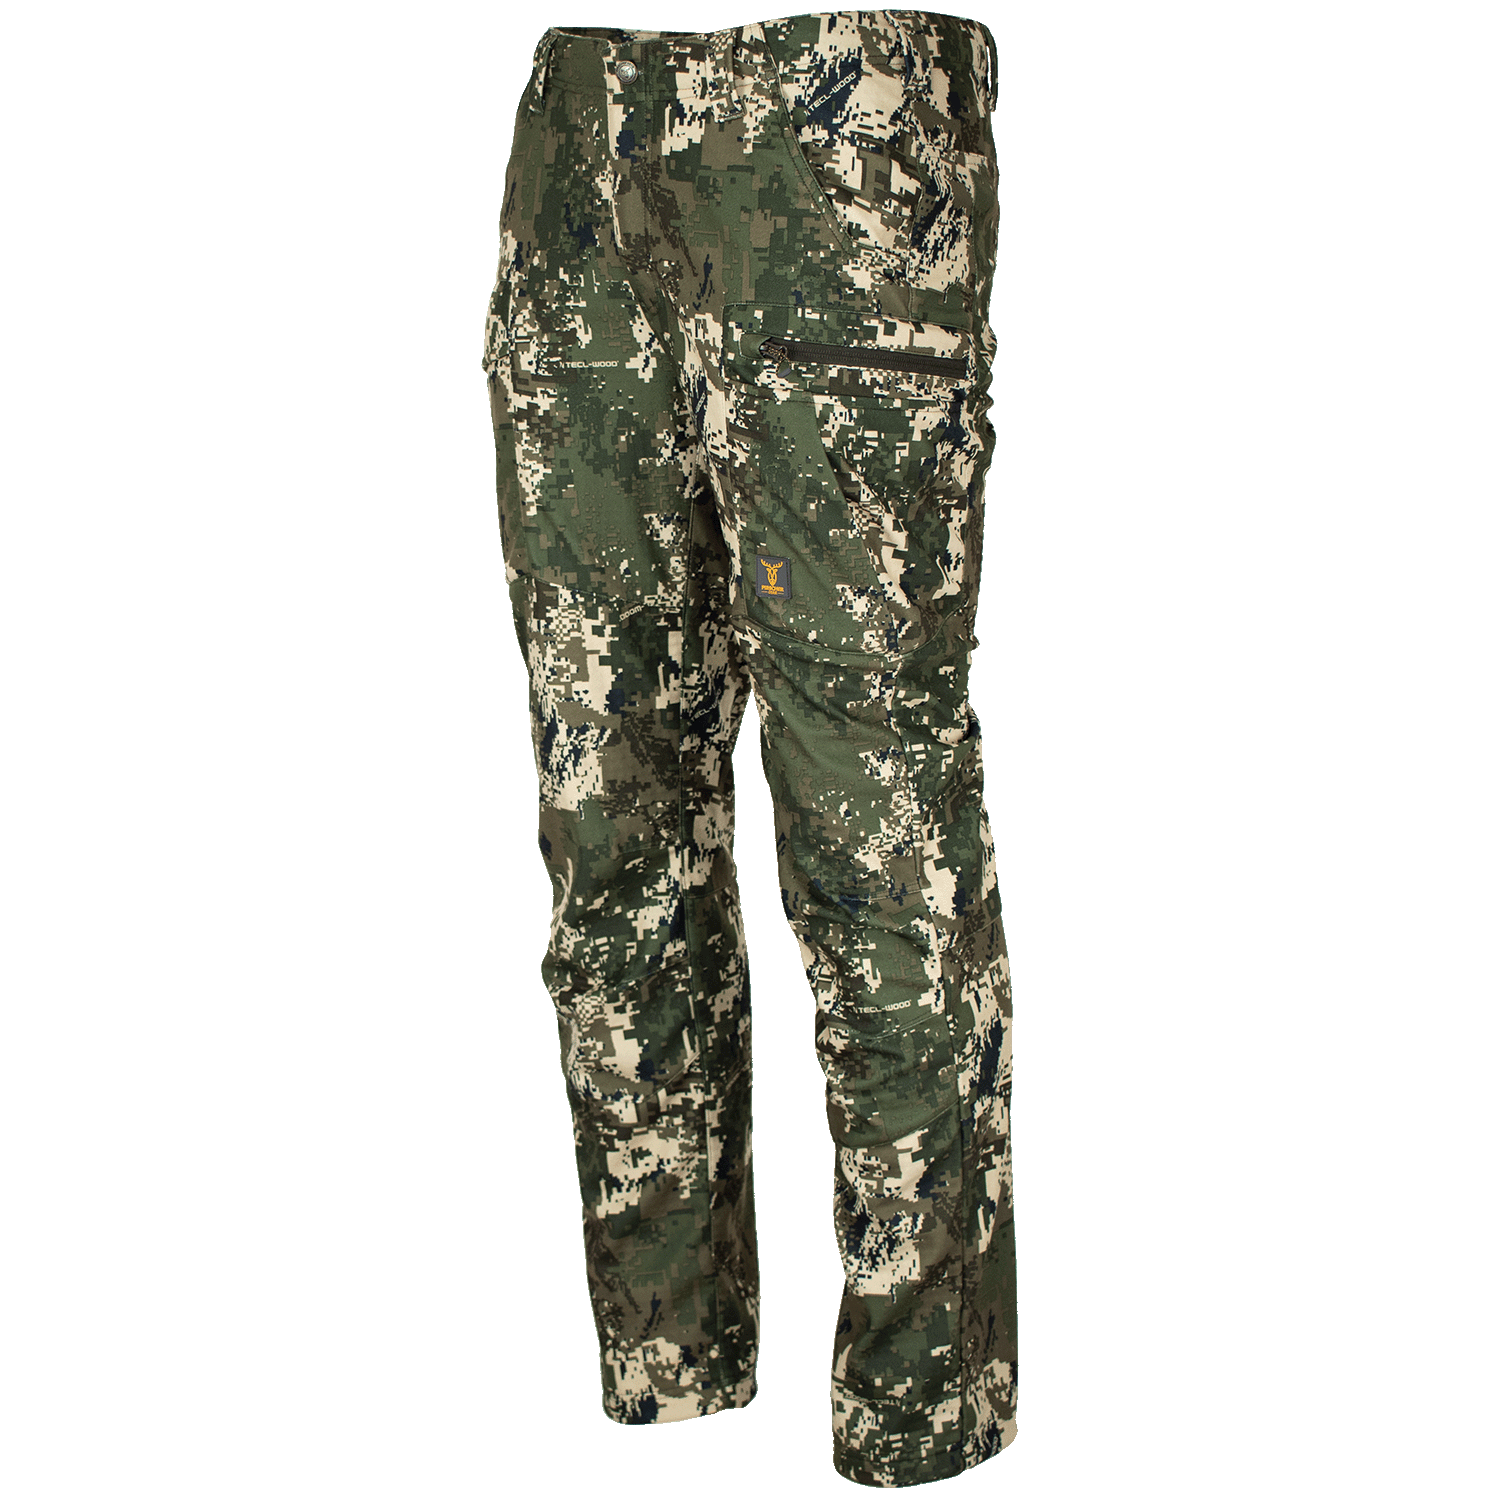 Pirscher Gear Silence Pro Pants (Optimax) - Camouflage Clothing